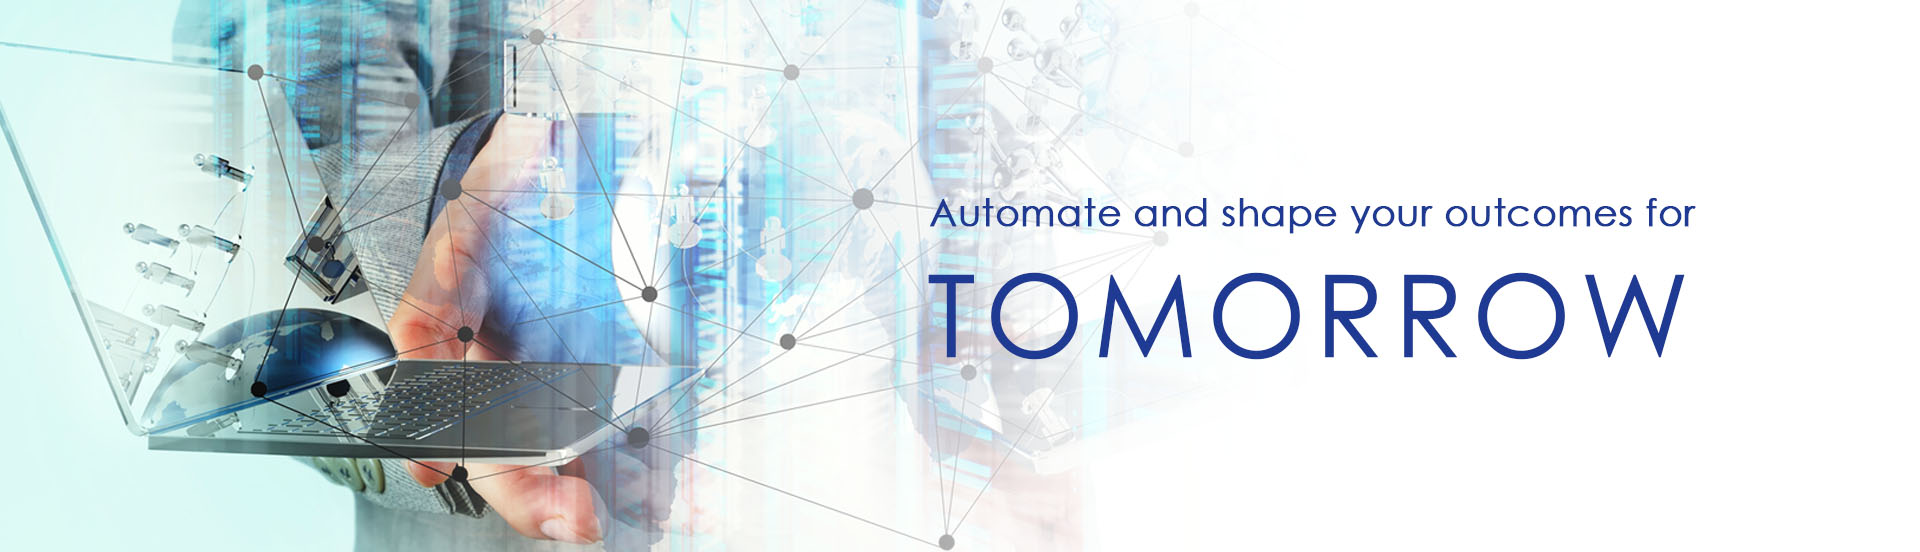 header reads automate and shape your outcomes for tomorrow